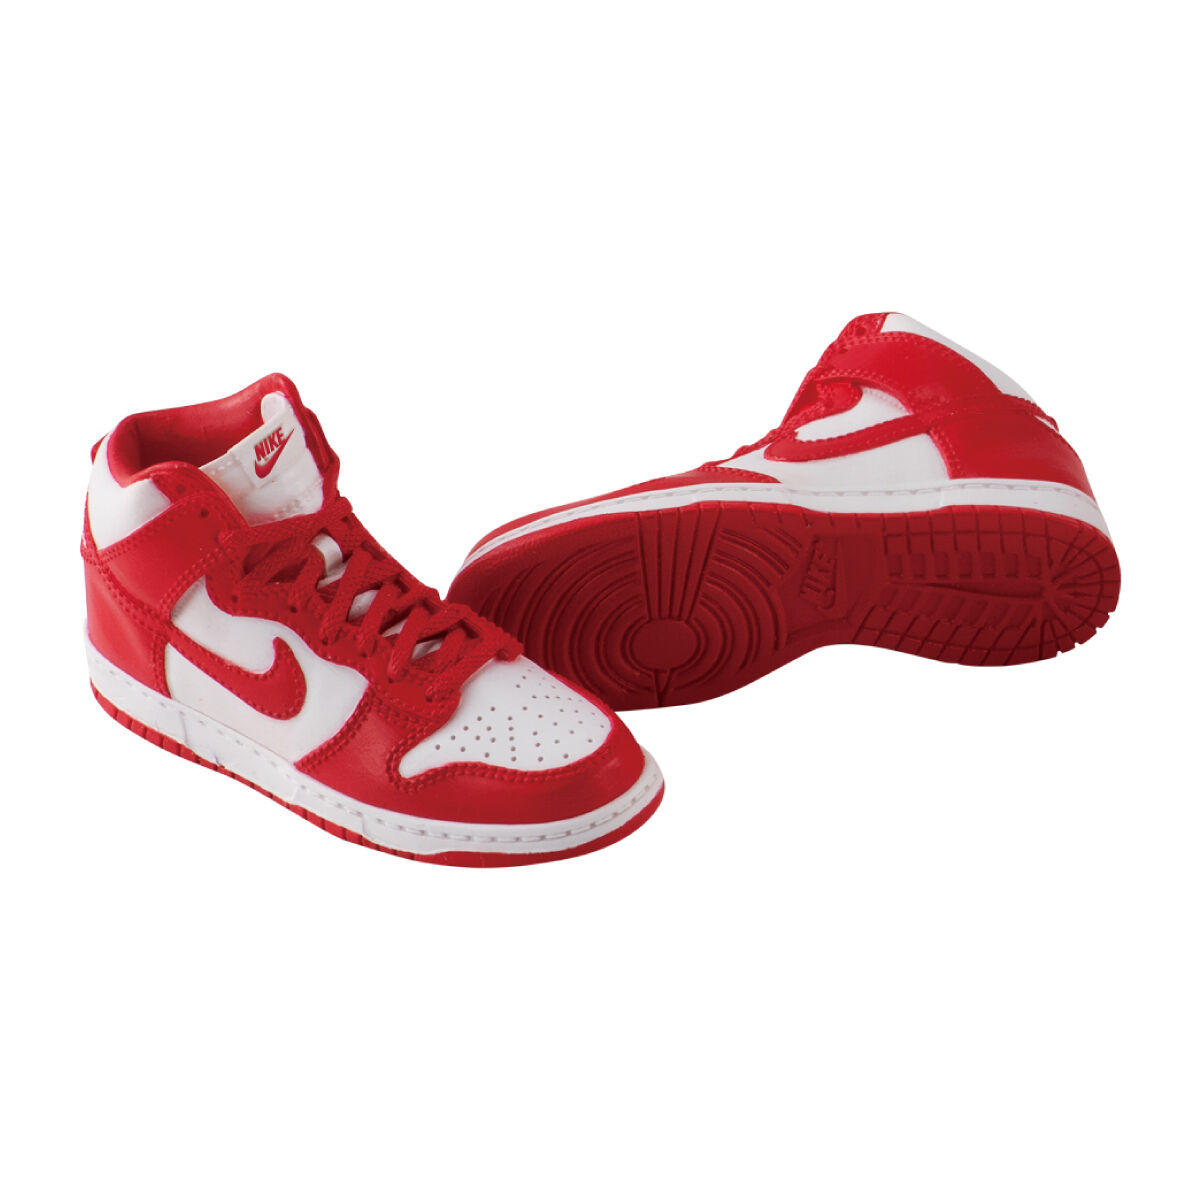 NIKE DUNK HIGH miniature collection 7種